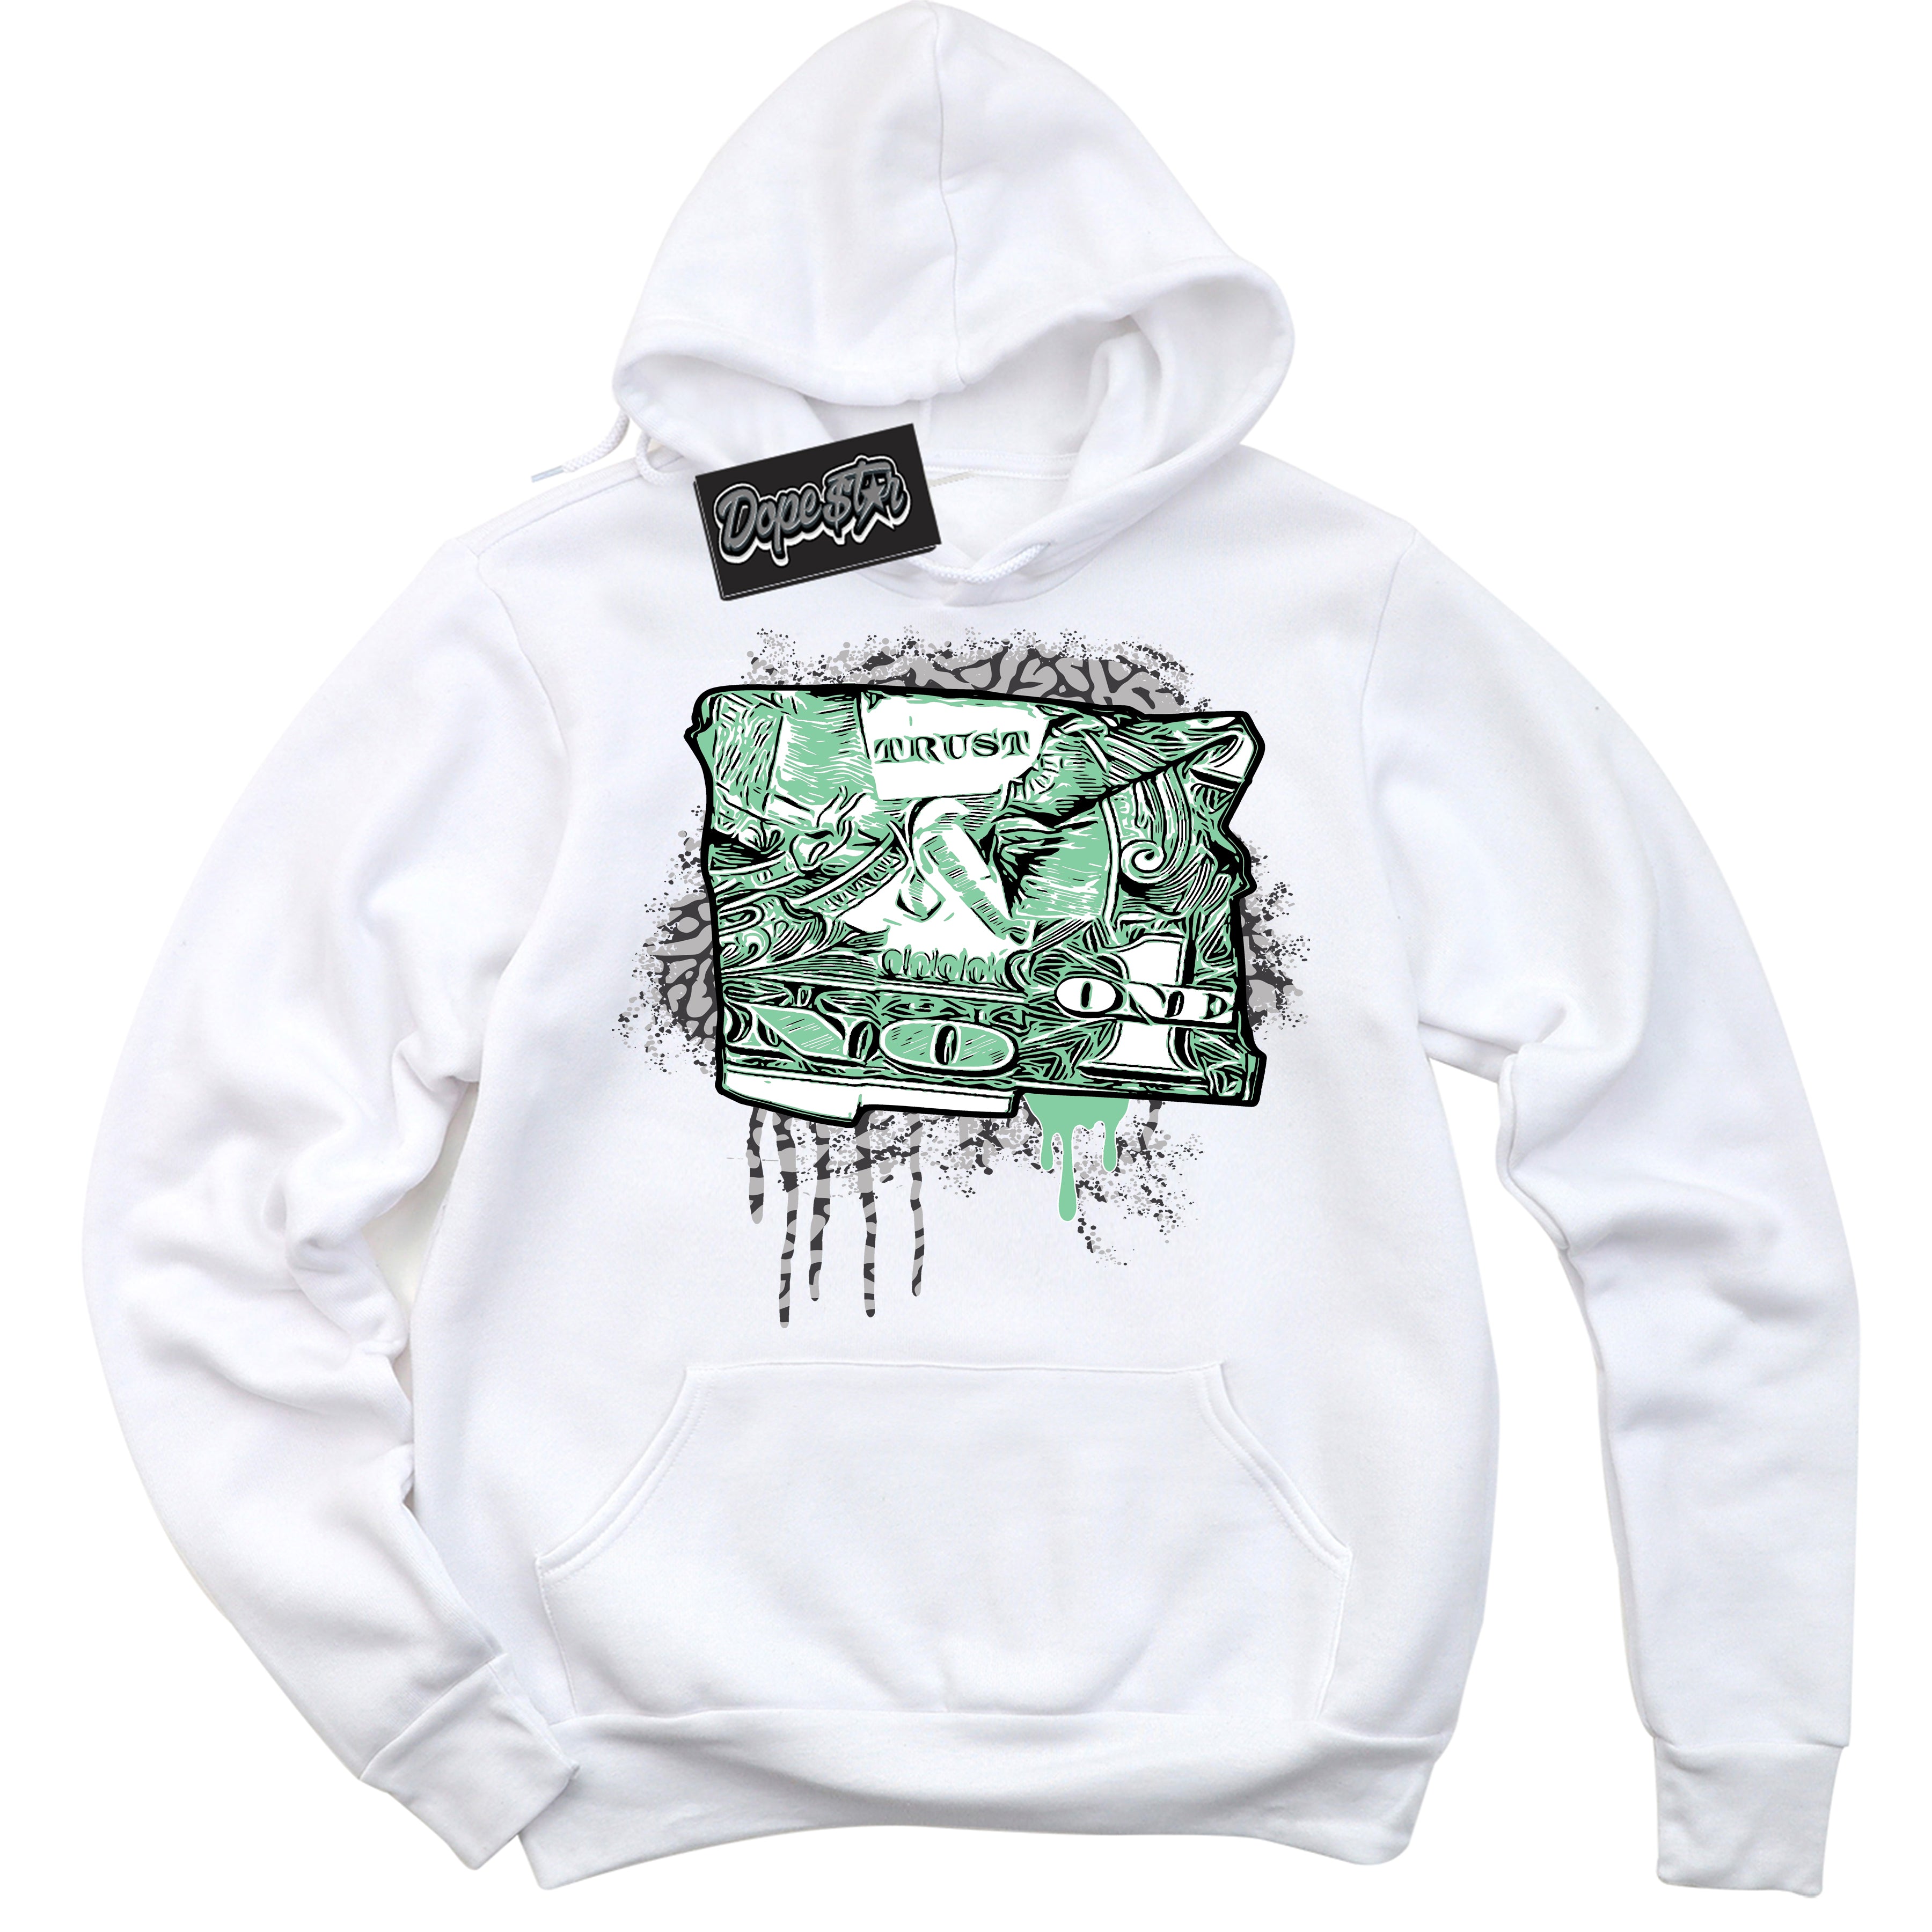 Cool White Graphic DopeStar Hoodie with “ Trust No One Dollar “ print, that perfectly matches Green Glow 3s sneakers